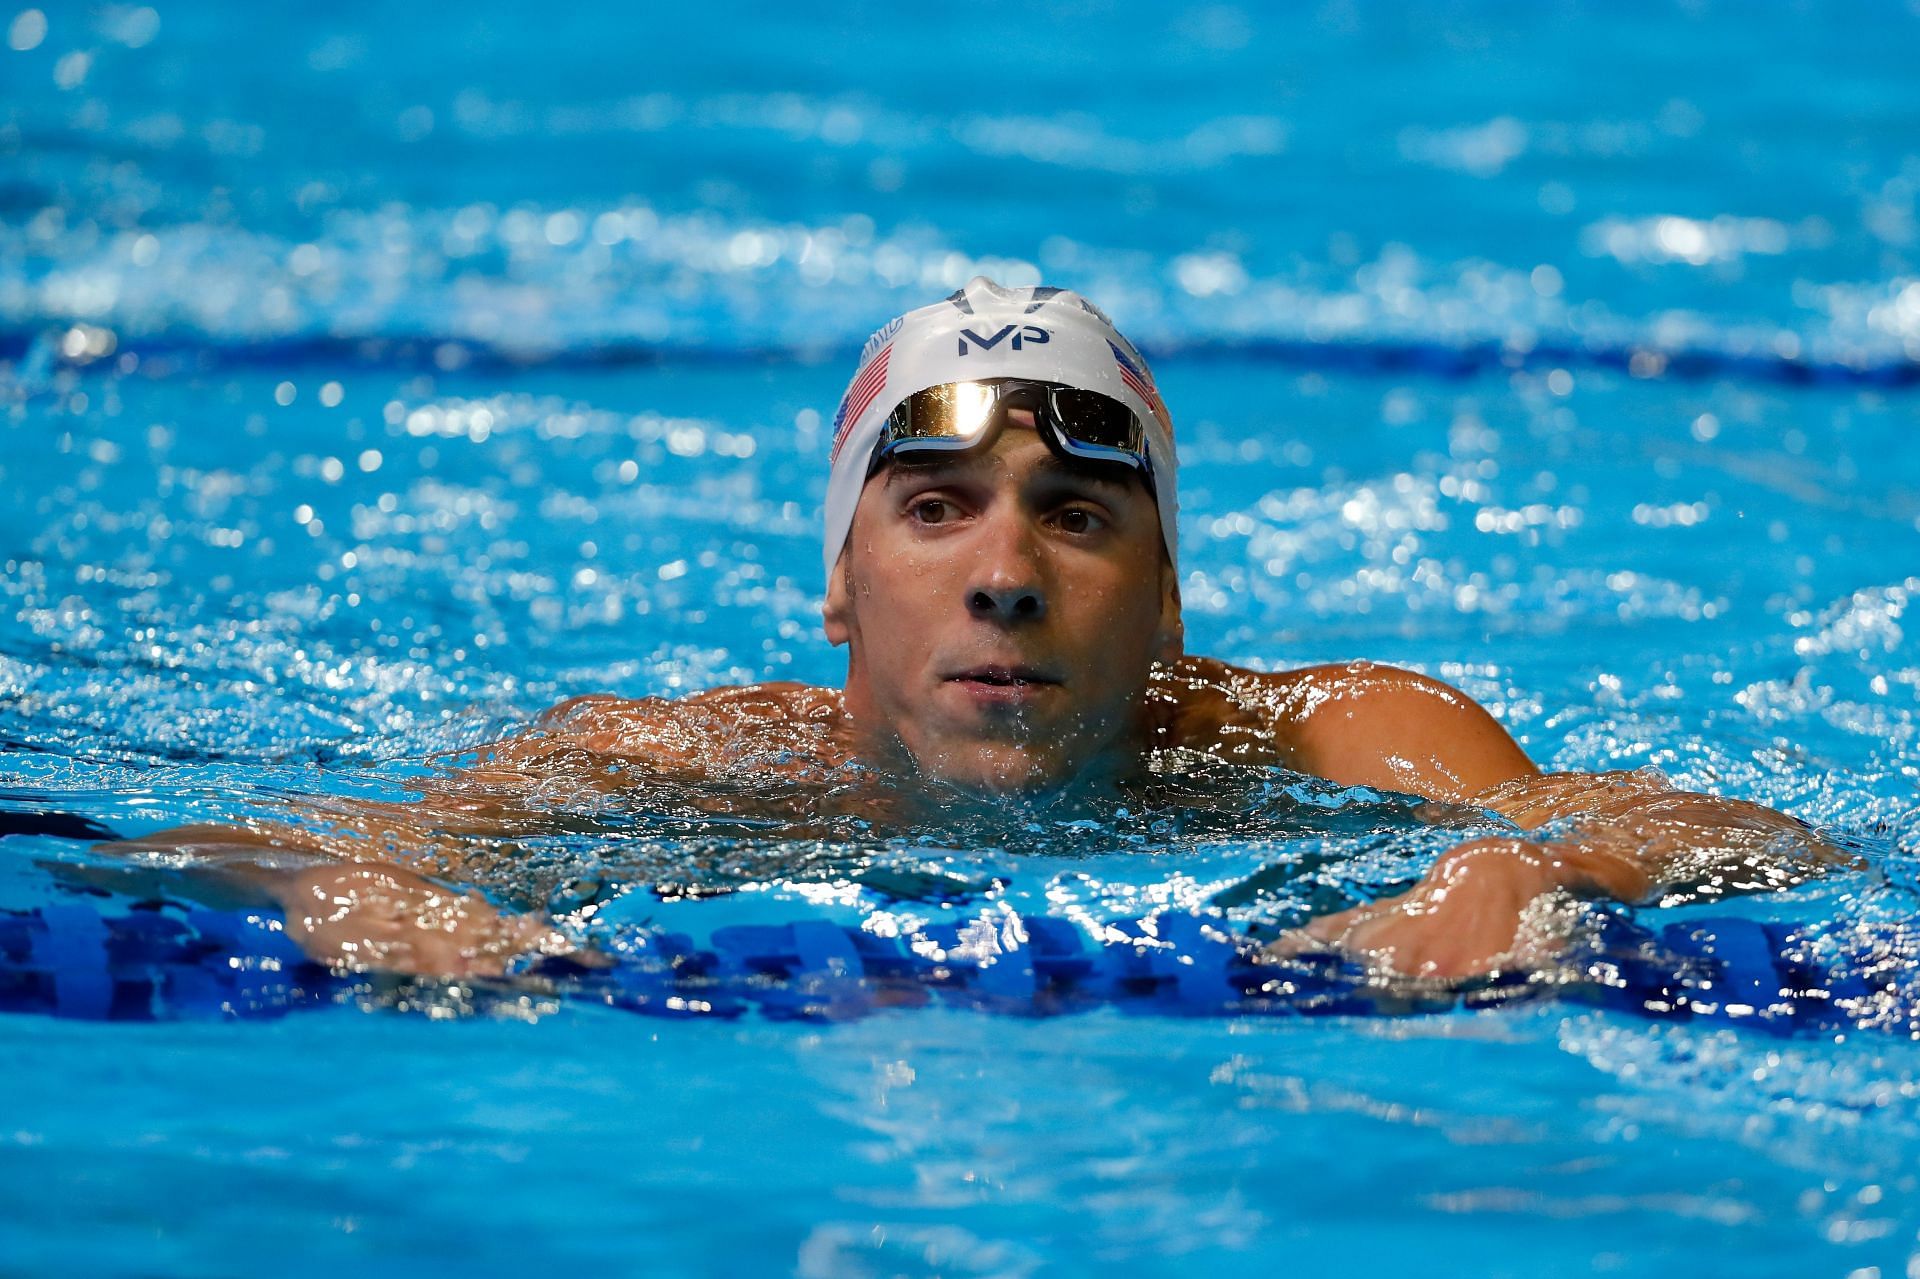 Michael Phelps at the 2016 US Olympic Team Swimming Trials